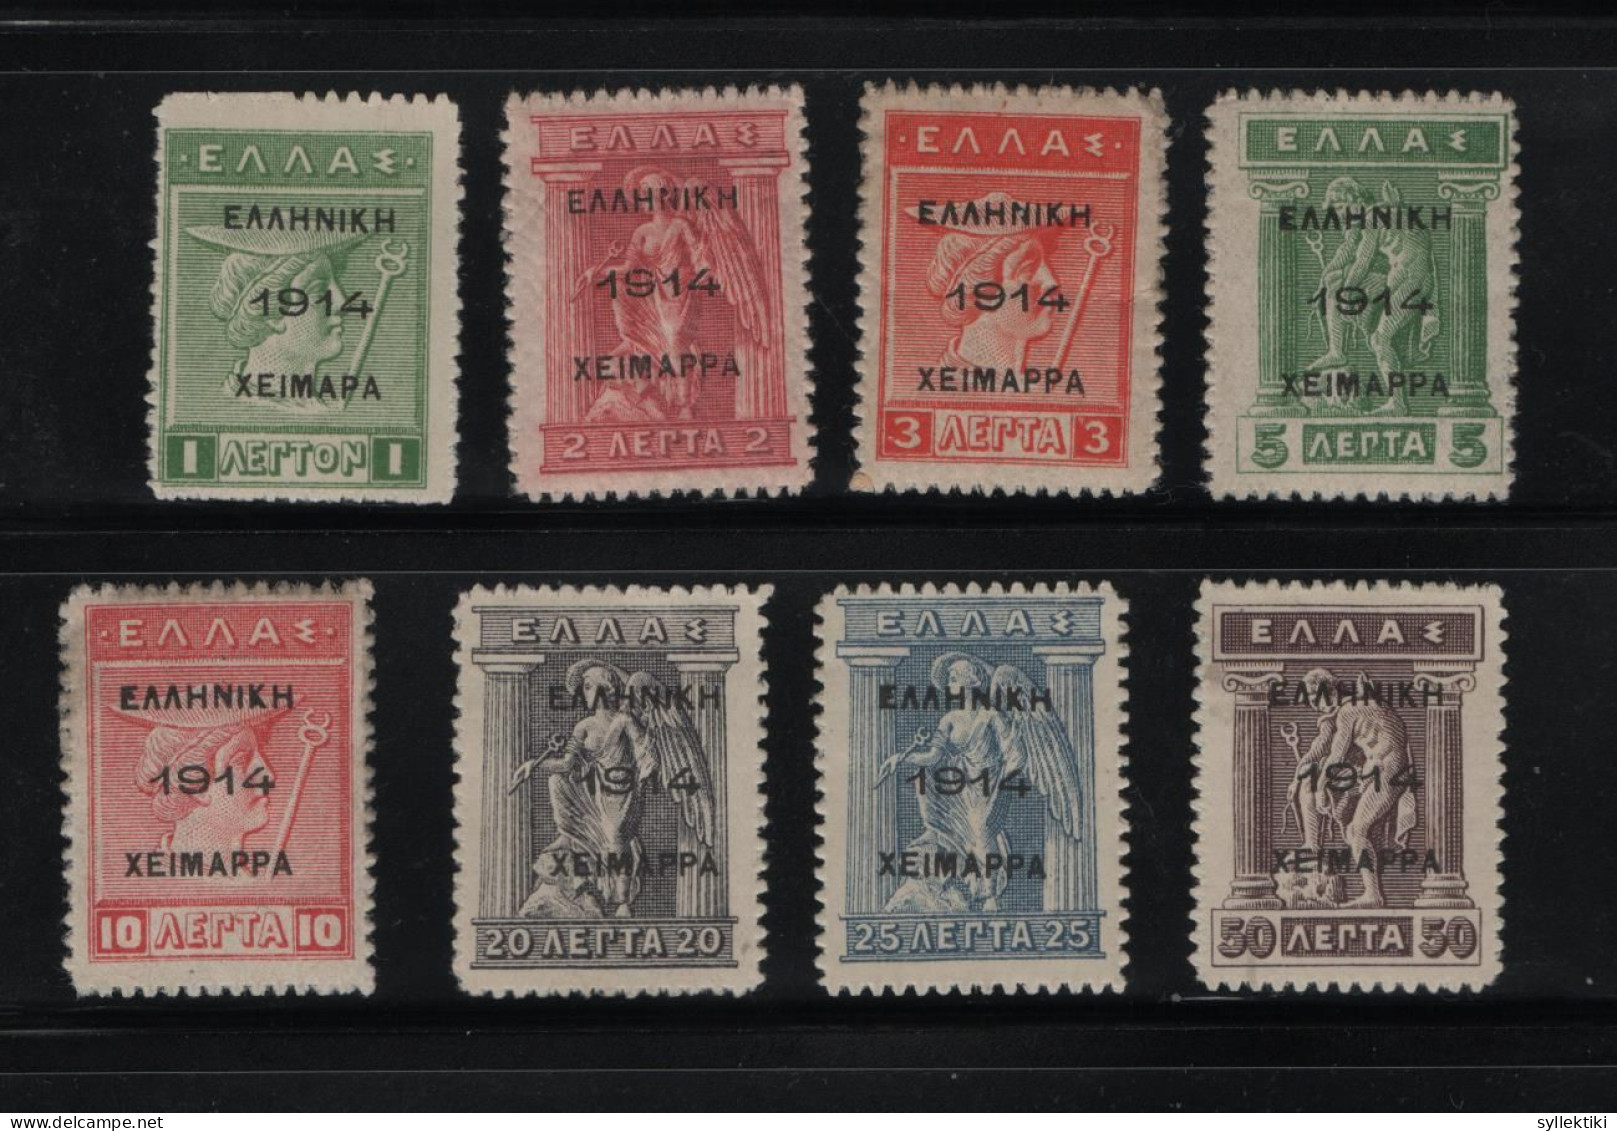 GREECE EPIRUS 1914 CHIMARRA ISSUE COMPLETE SET MH STAMPS    HELLAS No 68 - 75 AND VALUE EURO 1300.00 - Nordepirus